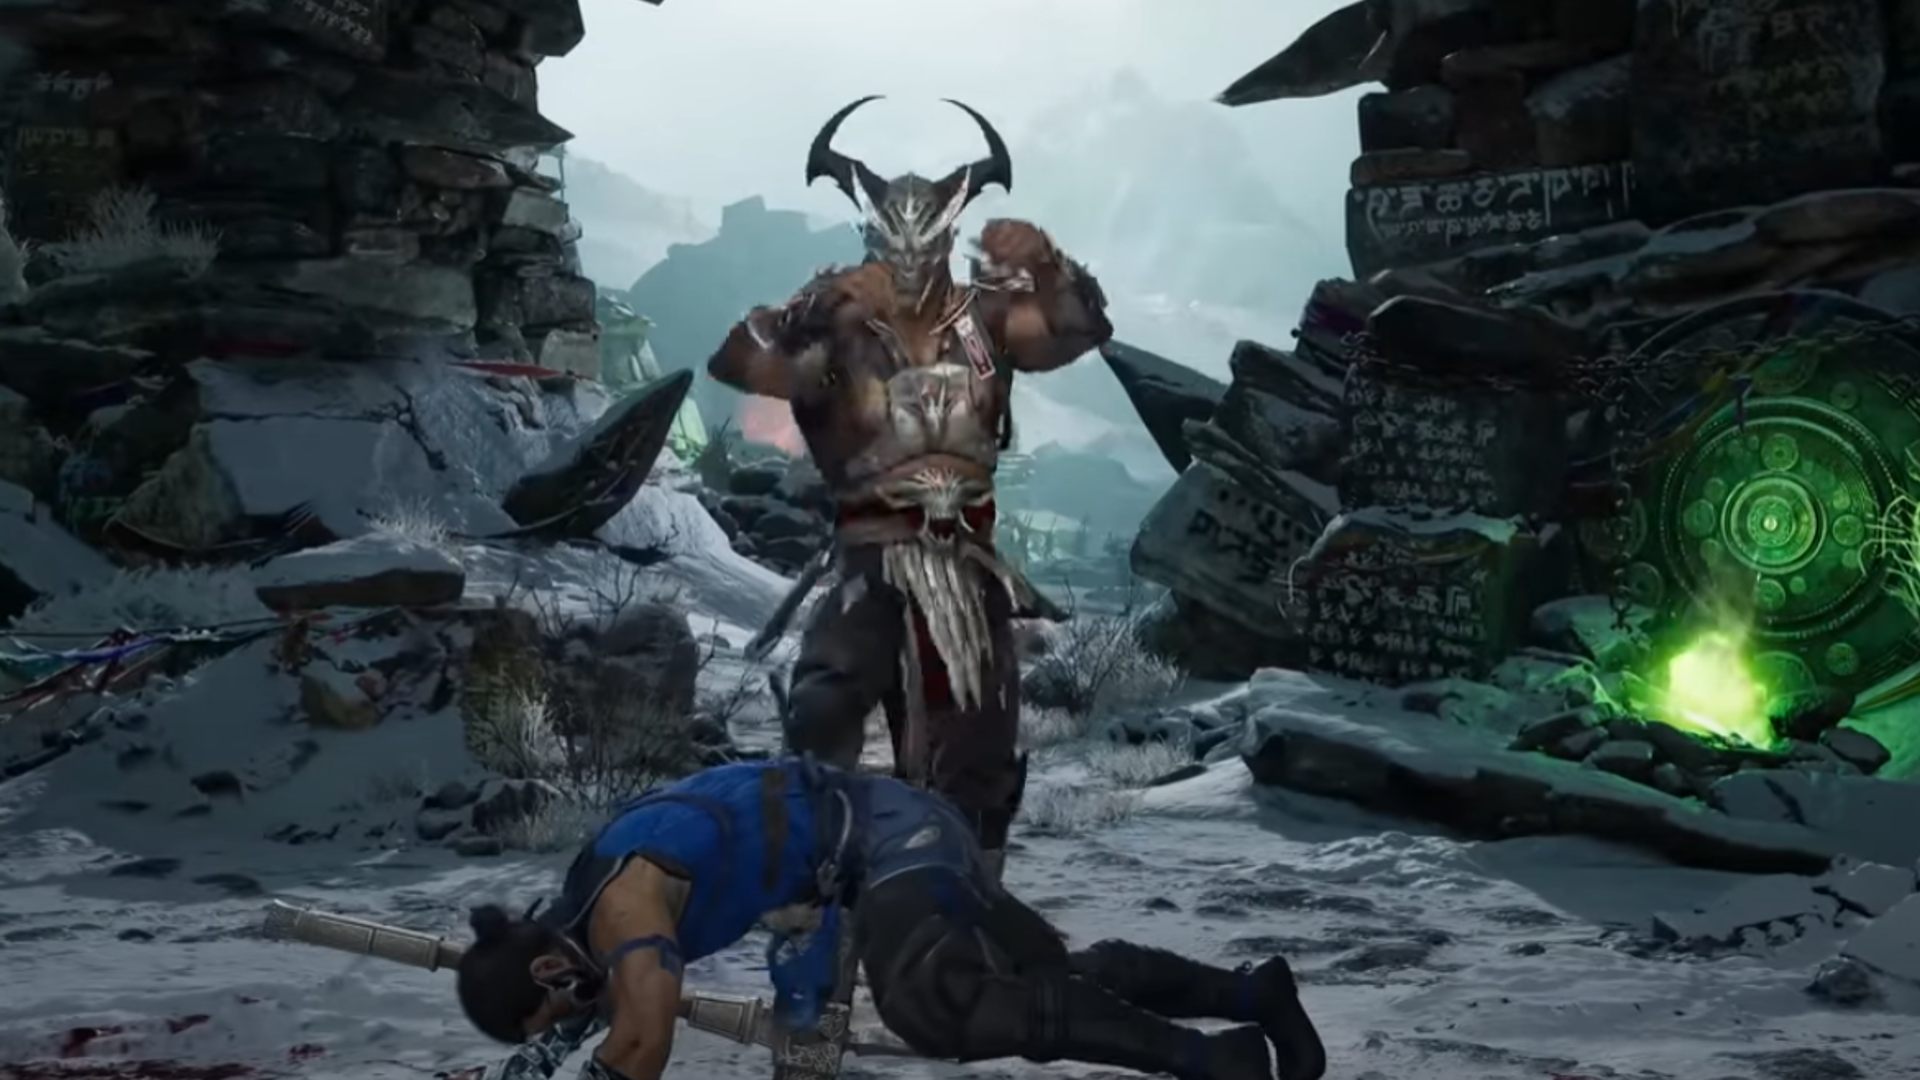 Mortal Kombat 1 characters: General Shao can be seen stepping on Sub Zero